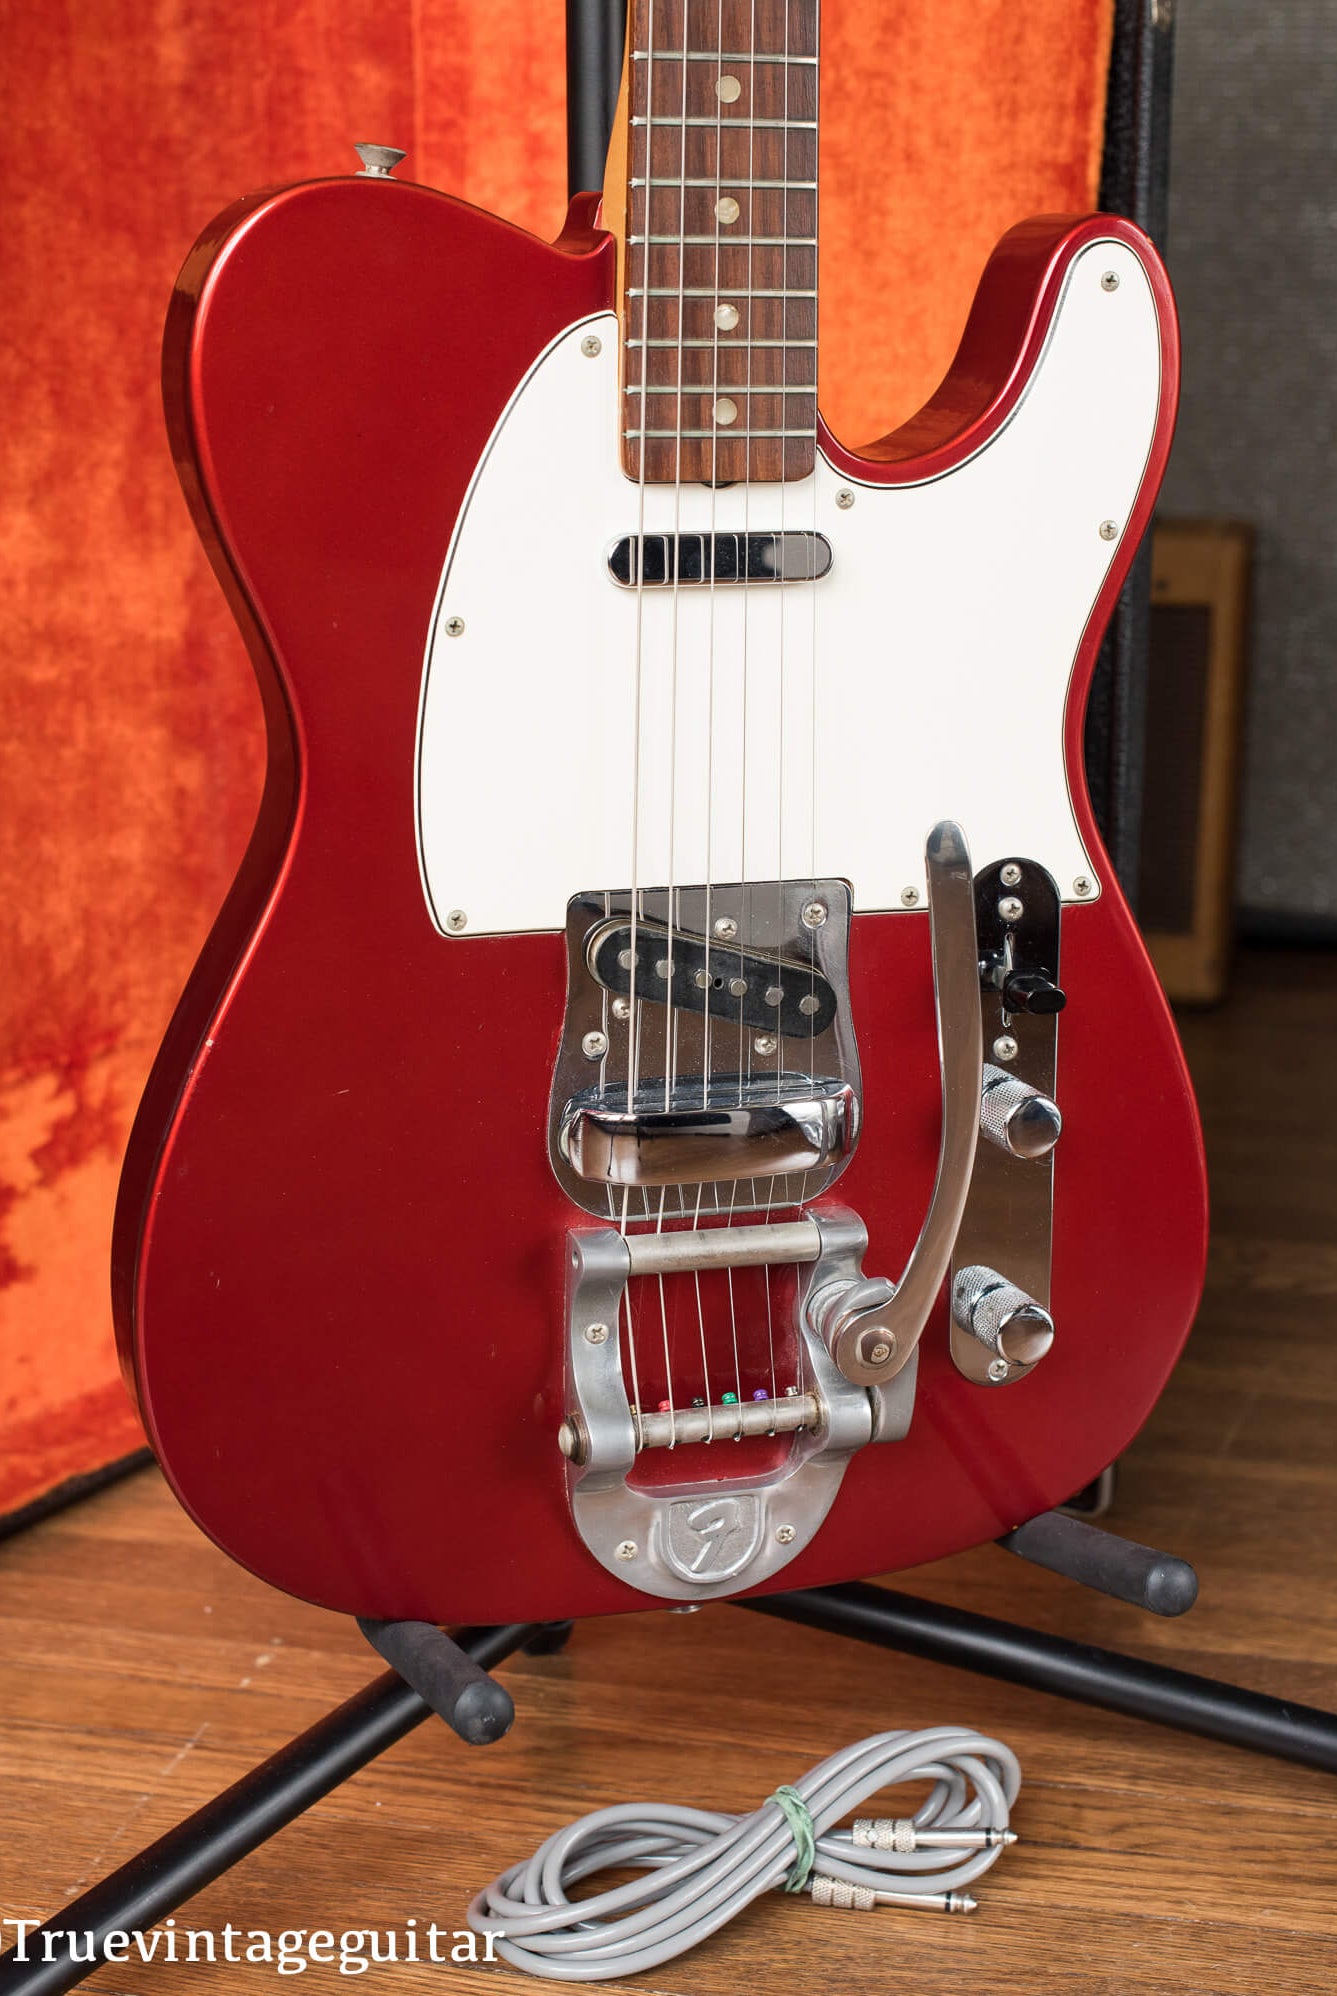 Fender Telecaster Red 1968 with Bigsby. How to date Fender Telecaster and Values.